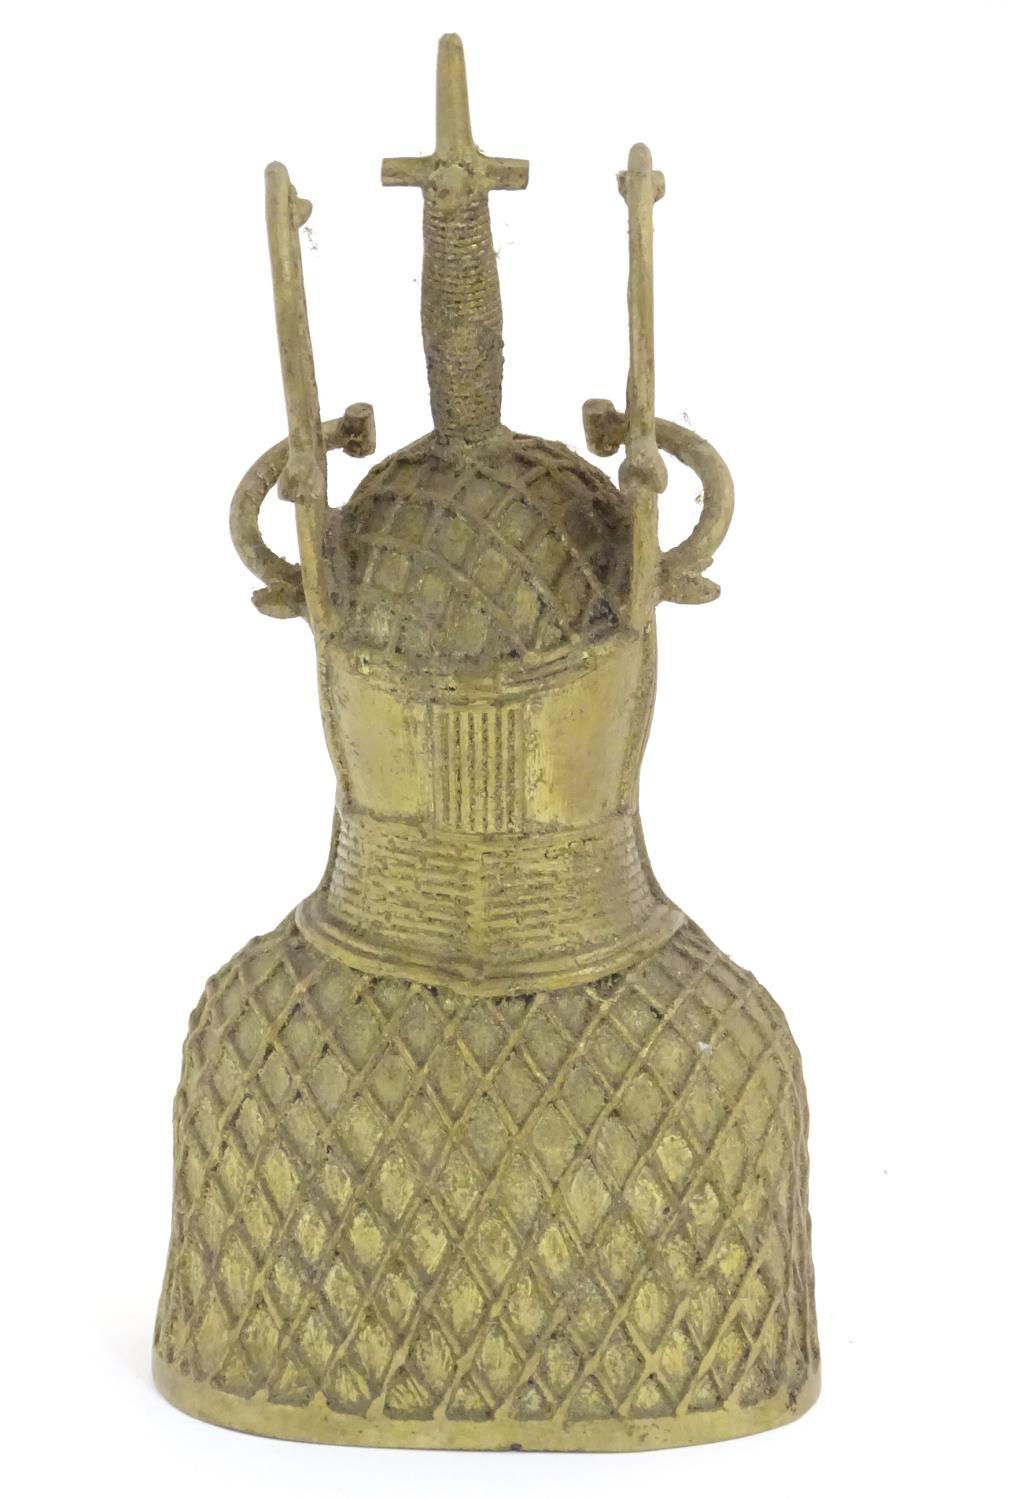 An early 20thC cast model of the Benin Bronze bust depicting Oba of Benin in ceremonial dress. - Image 5 of 5